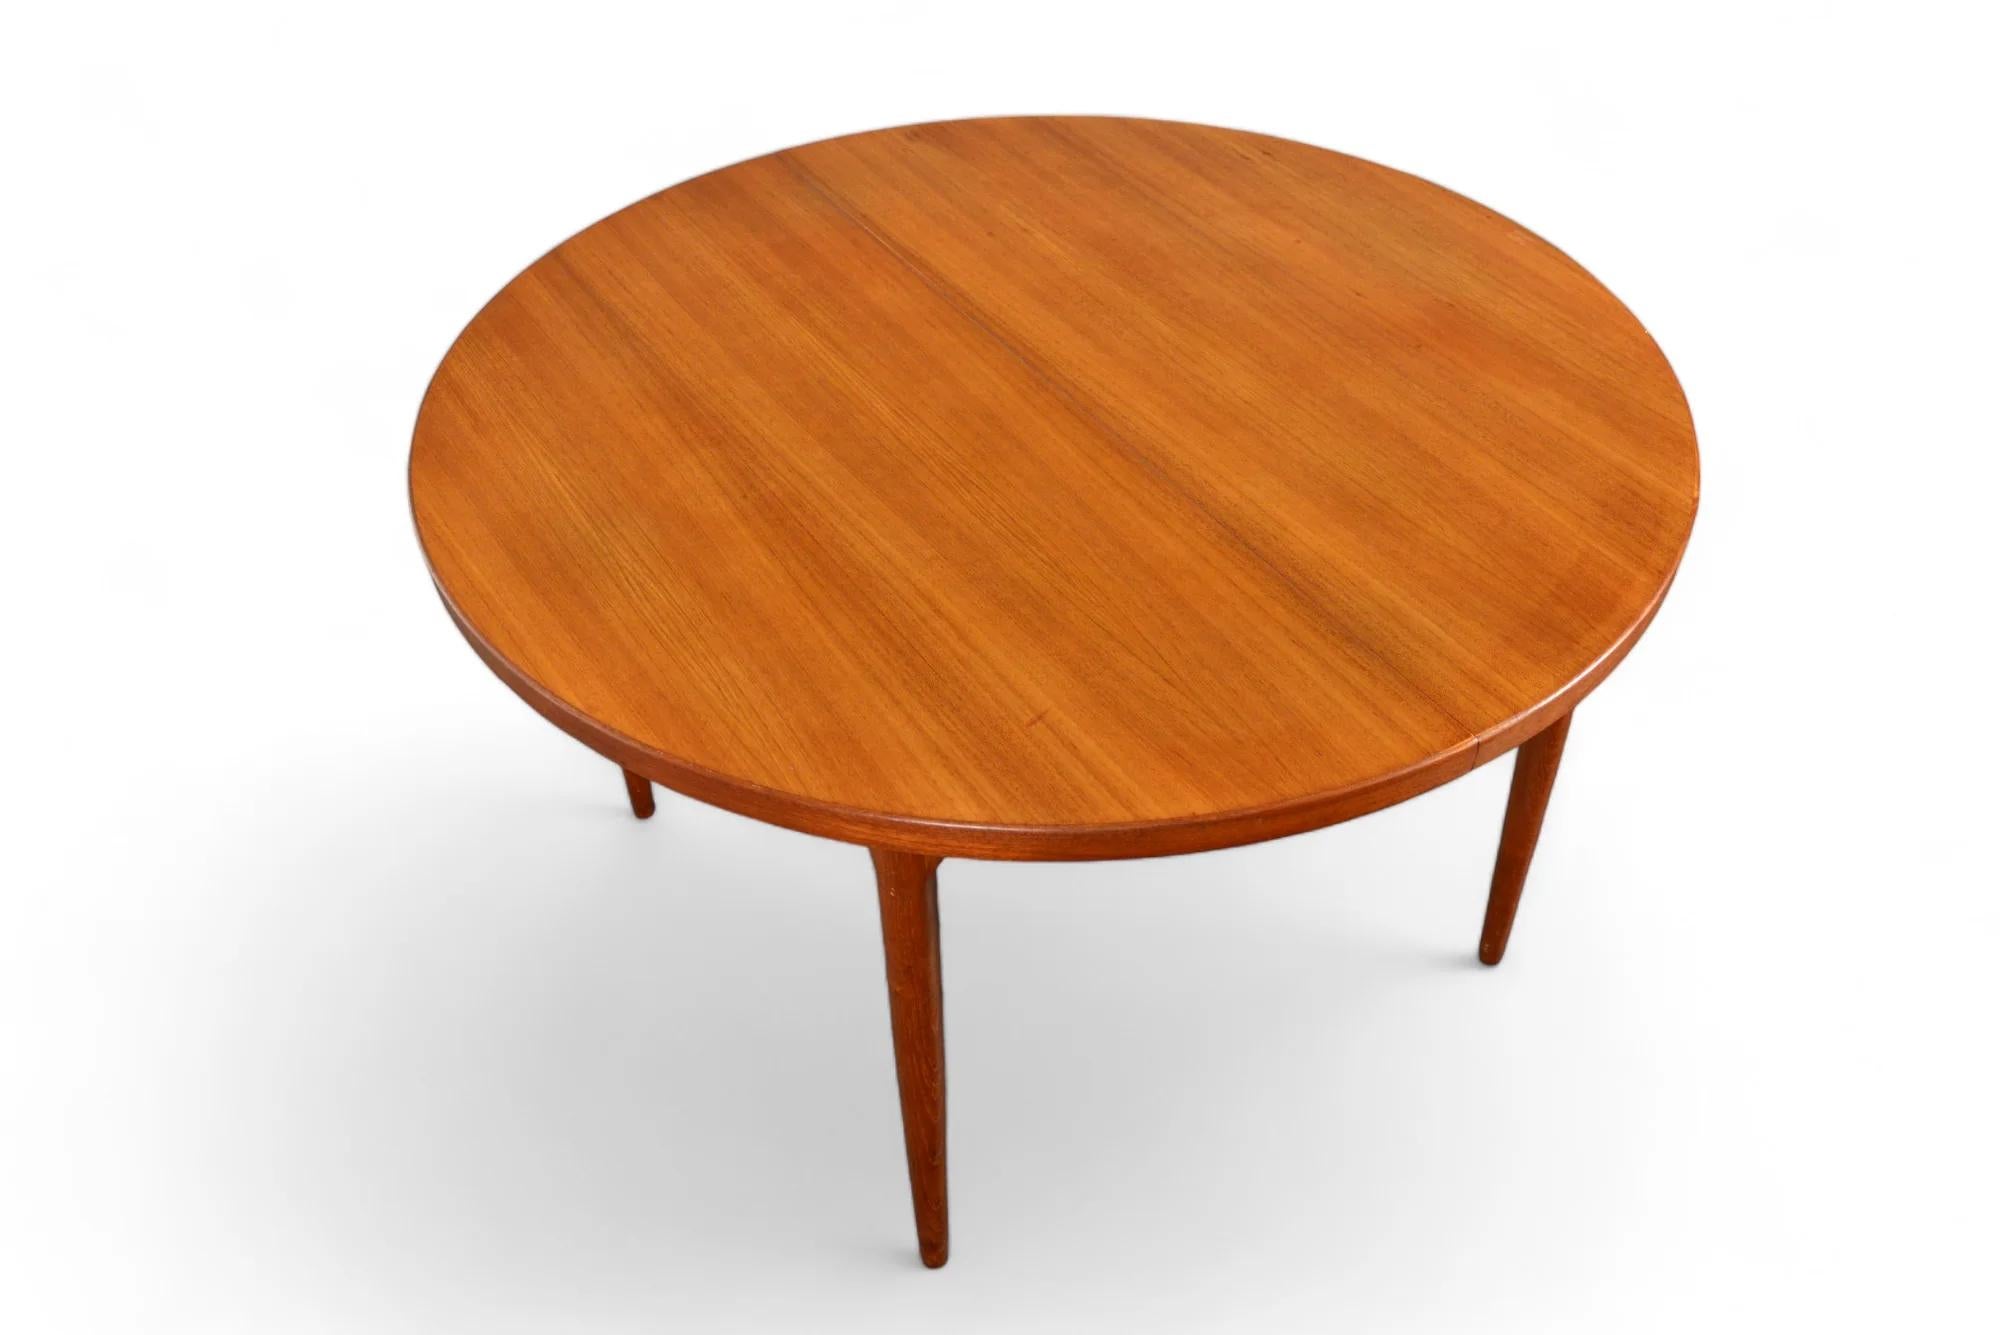 Round Danish 2 Leaf Teak Dining Table By Cj Rosengaarden + Coffee Table In Good Condition For Sale In Berkeley, CA